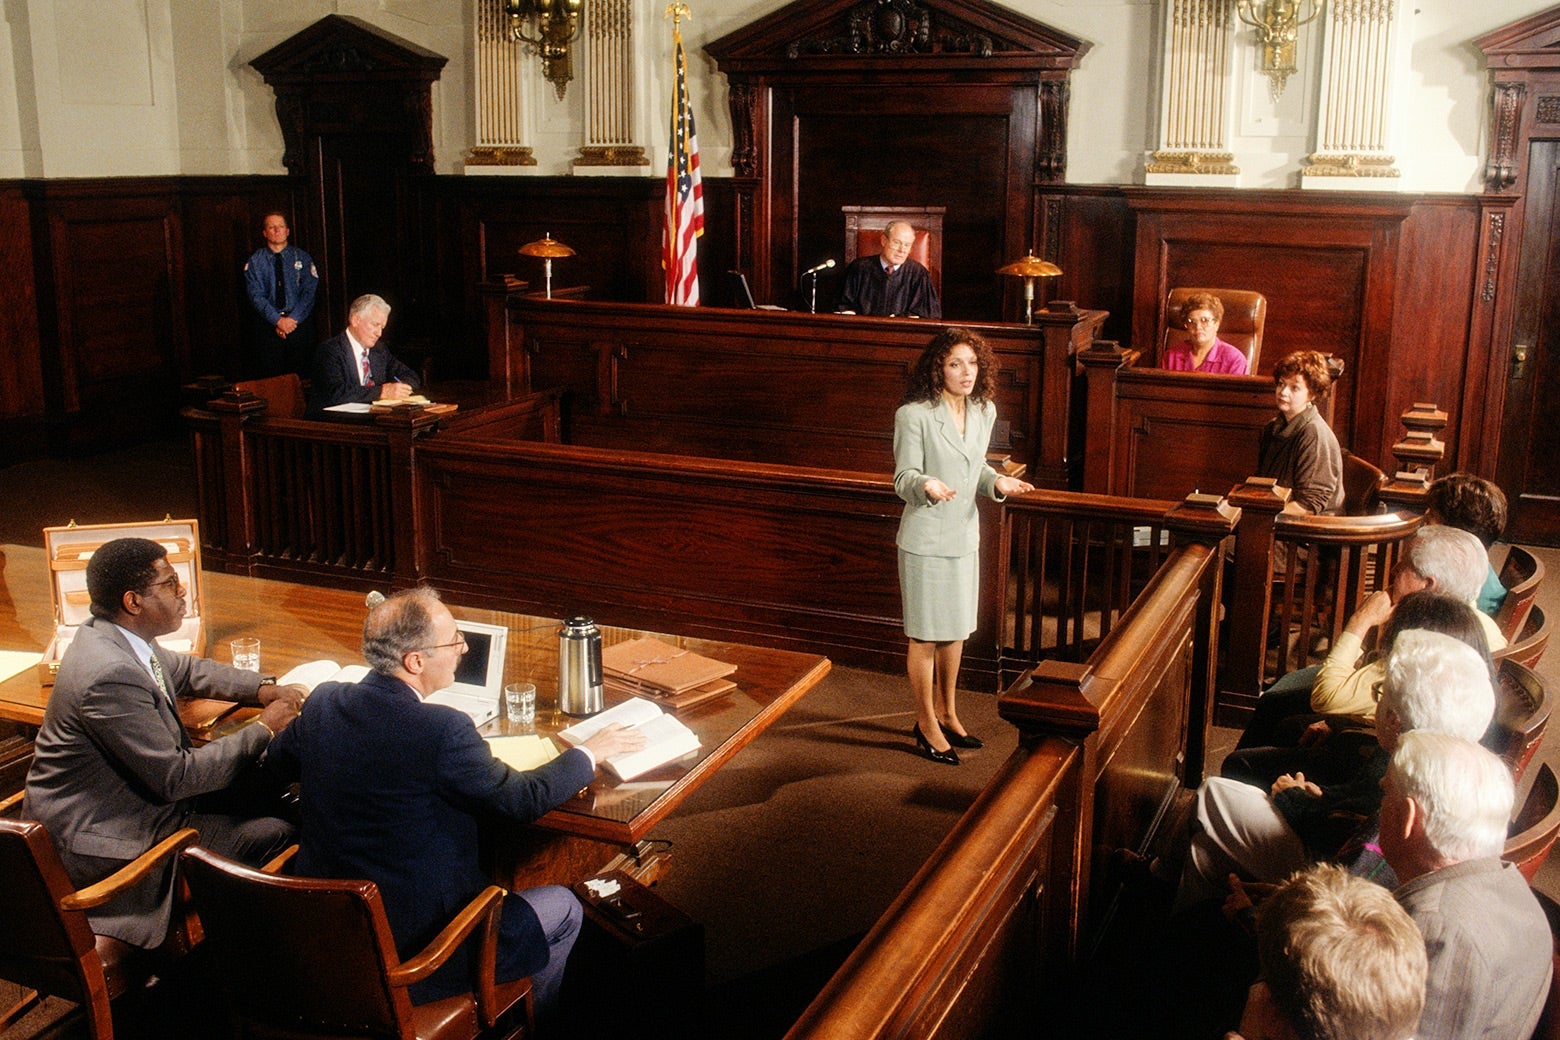 A female prosecutor stands and speaks to the jury in a courtroom